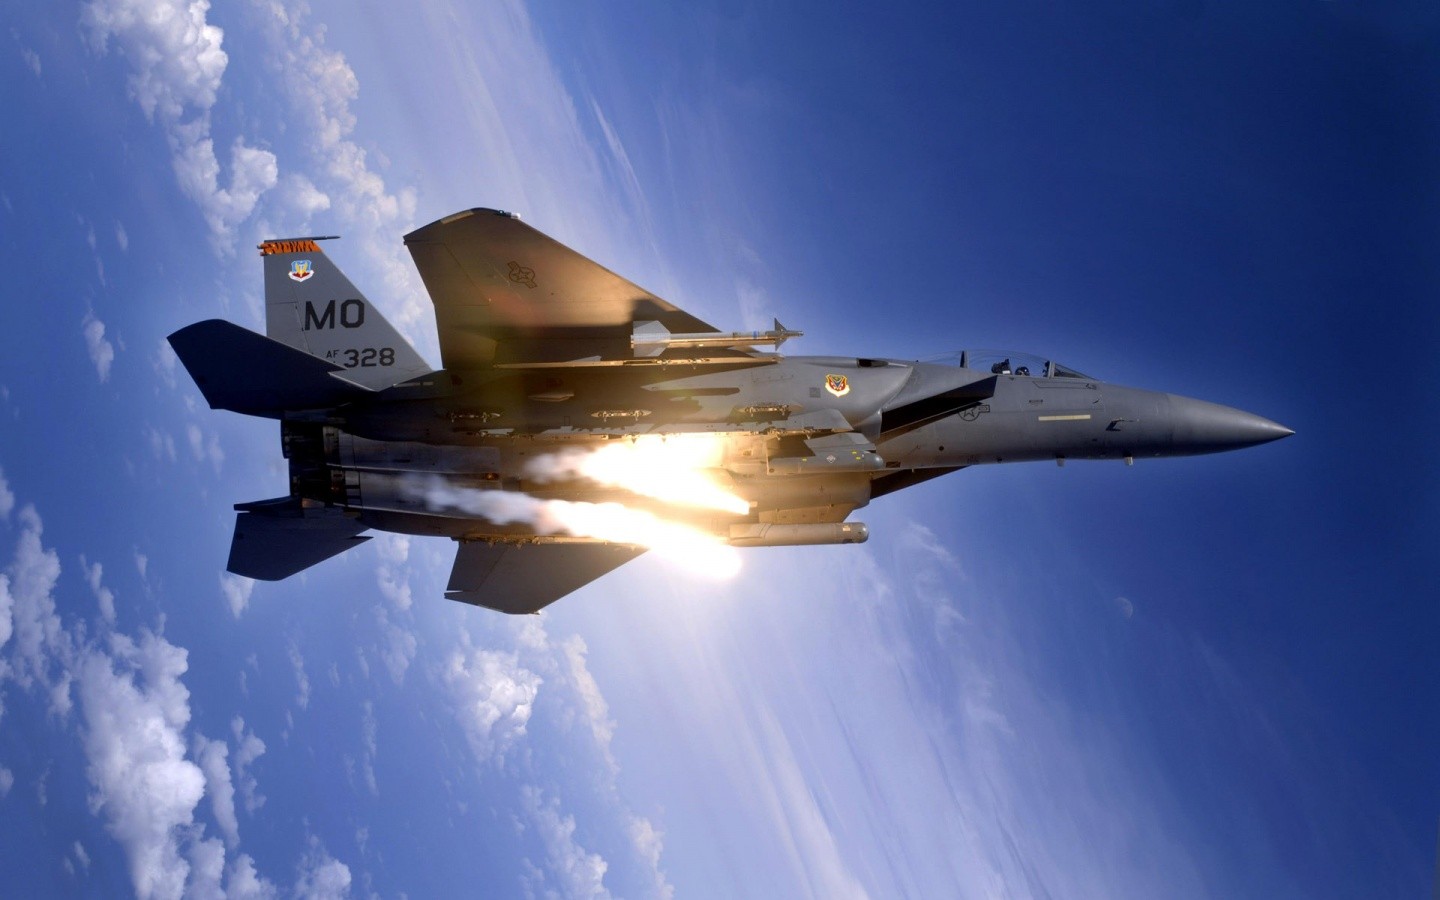 General 1440x900 missiles airplane blue clouds clear sky military military aircraft F-15 Eagle vehicle military vehicle jet fighter flares American aircraft